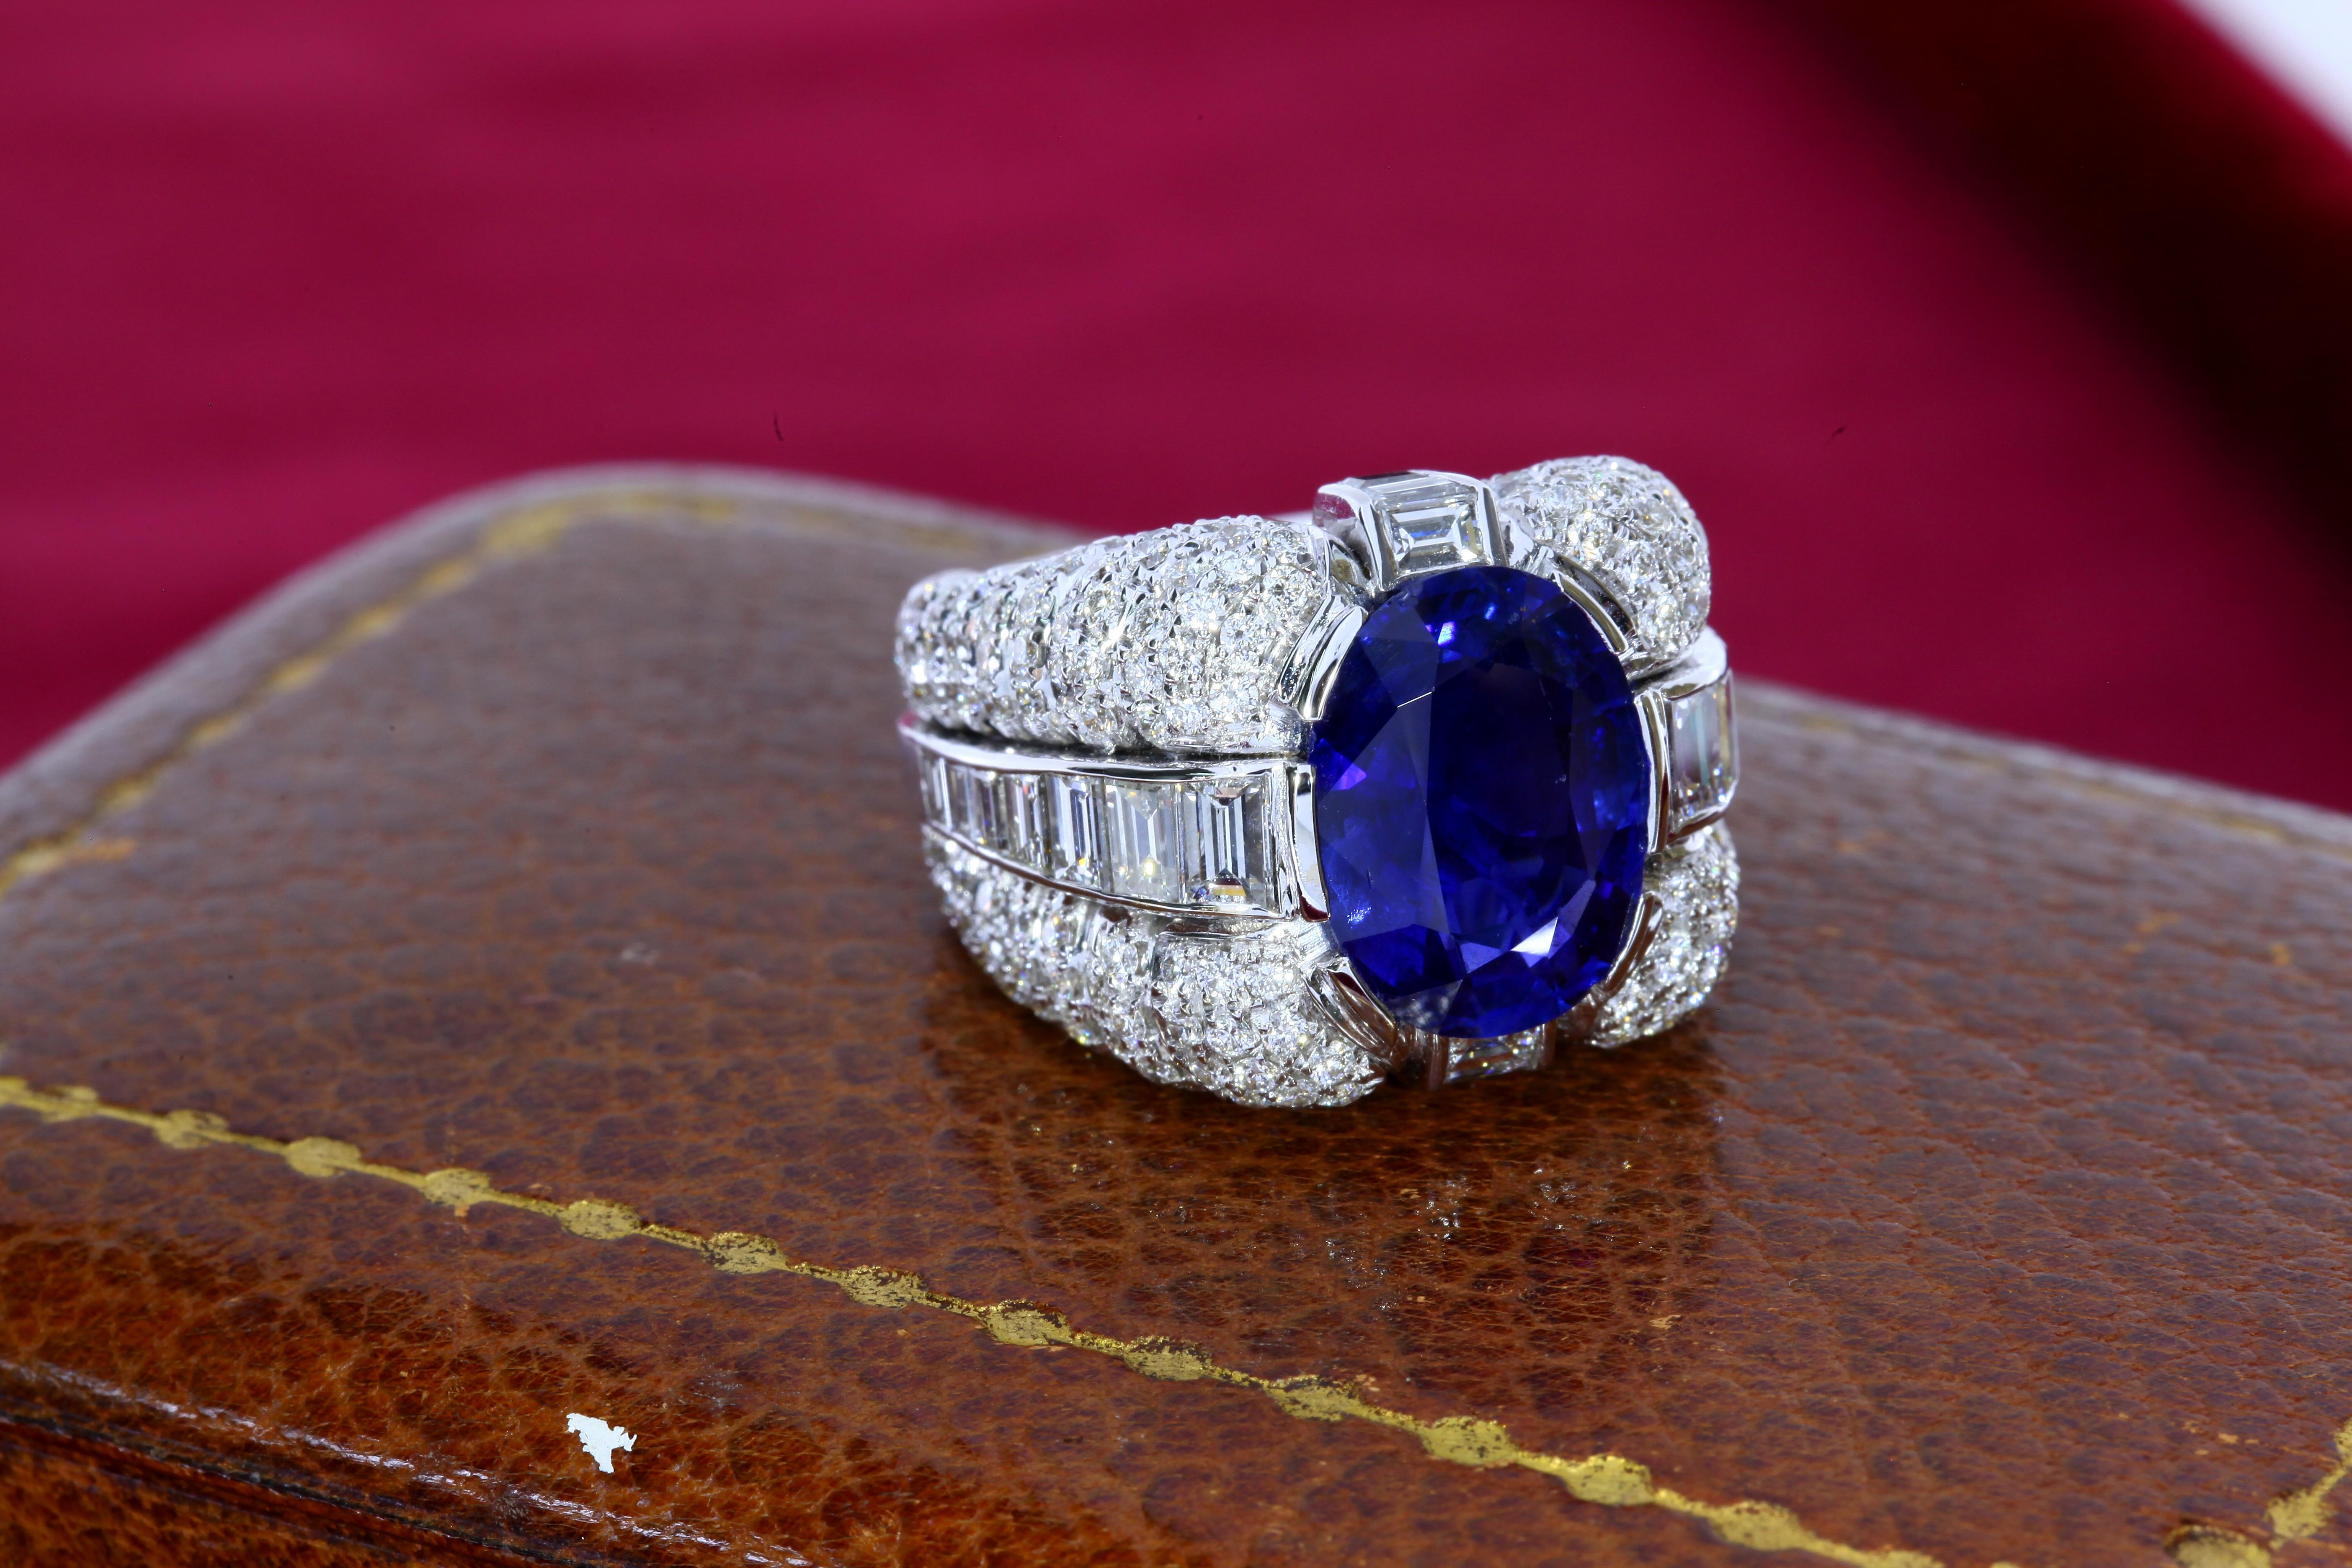 The 6.09 carat oval shaped sapphire of Burmese (Myanmar) origin is untreated and certified by SSEF. The stone is set in a large white gold ring clad with round- and baguette- cut diamonds. The ring has a weight of 24 grams and is size 53 (European